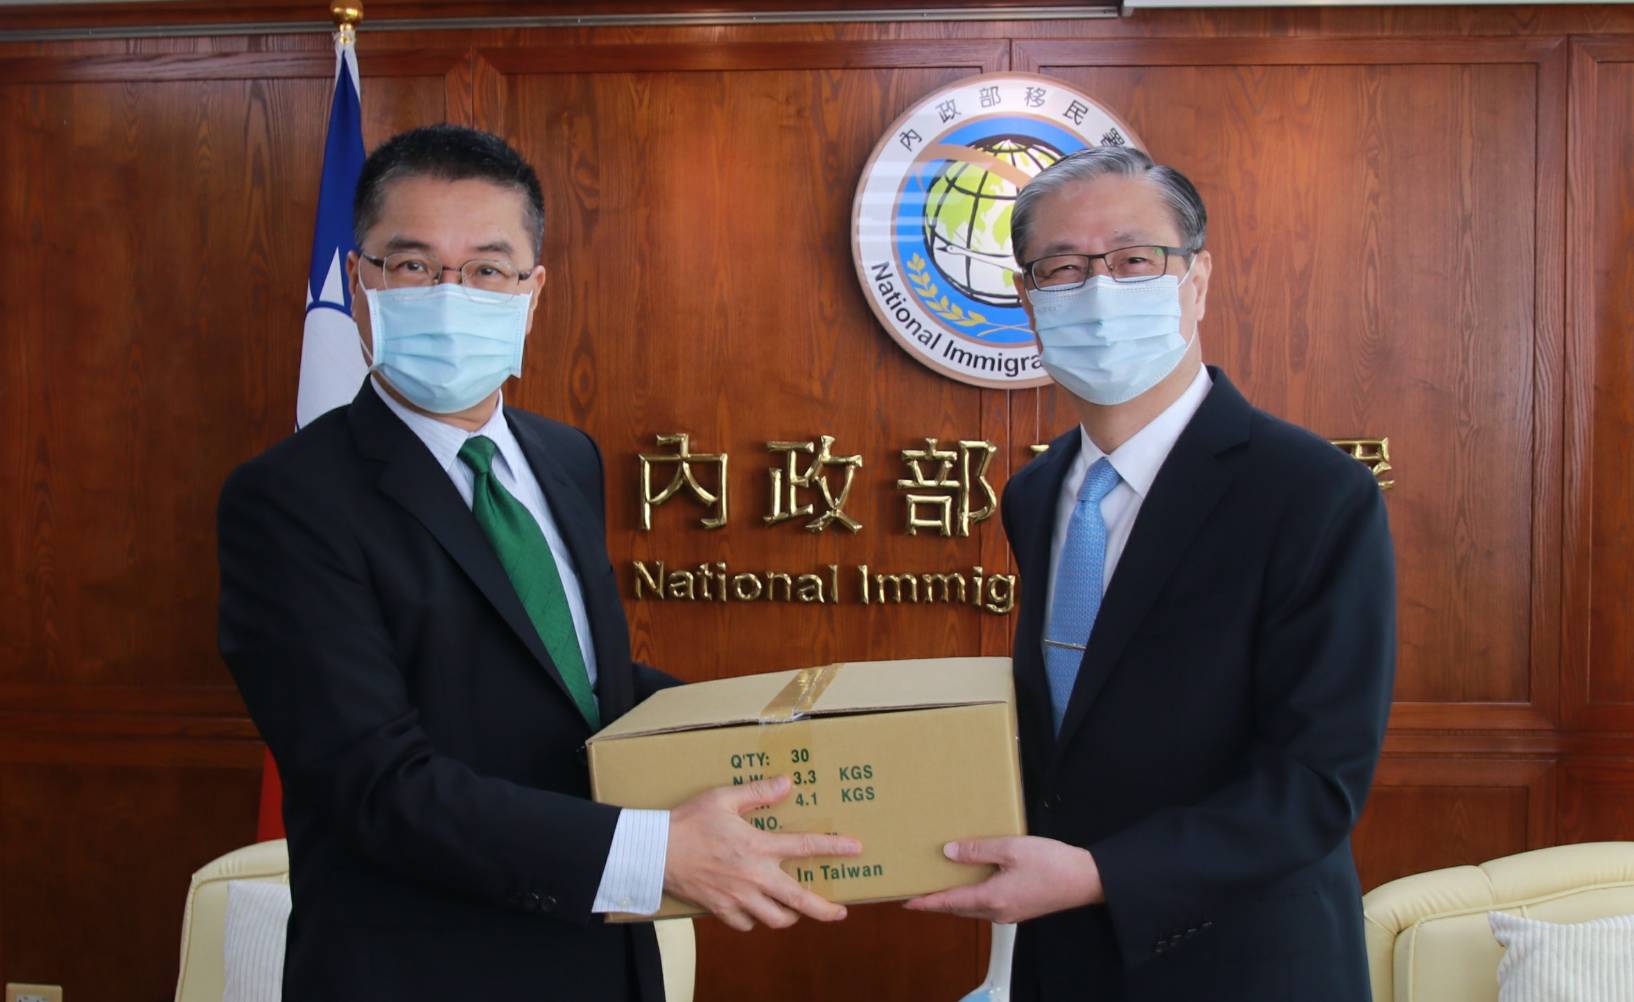 The Minister of the Interior Hsu Kuo-Yung (left) went to thank colleagues and took a photo with the Director of the National Immigration Agency Chung Ching-Kun (right). (Photo/provided by the National Immigration Agency)